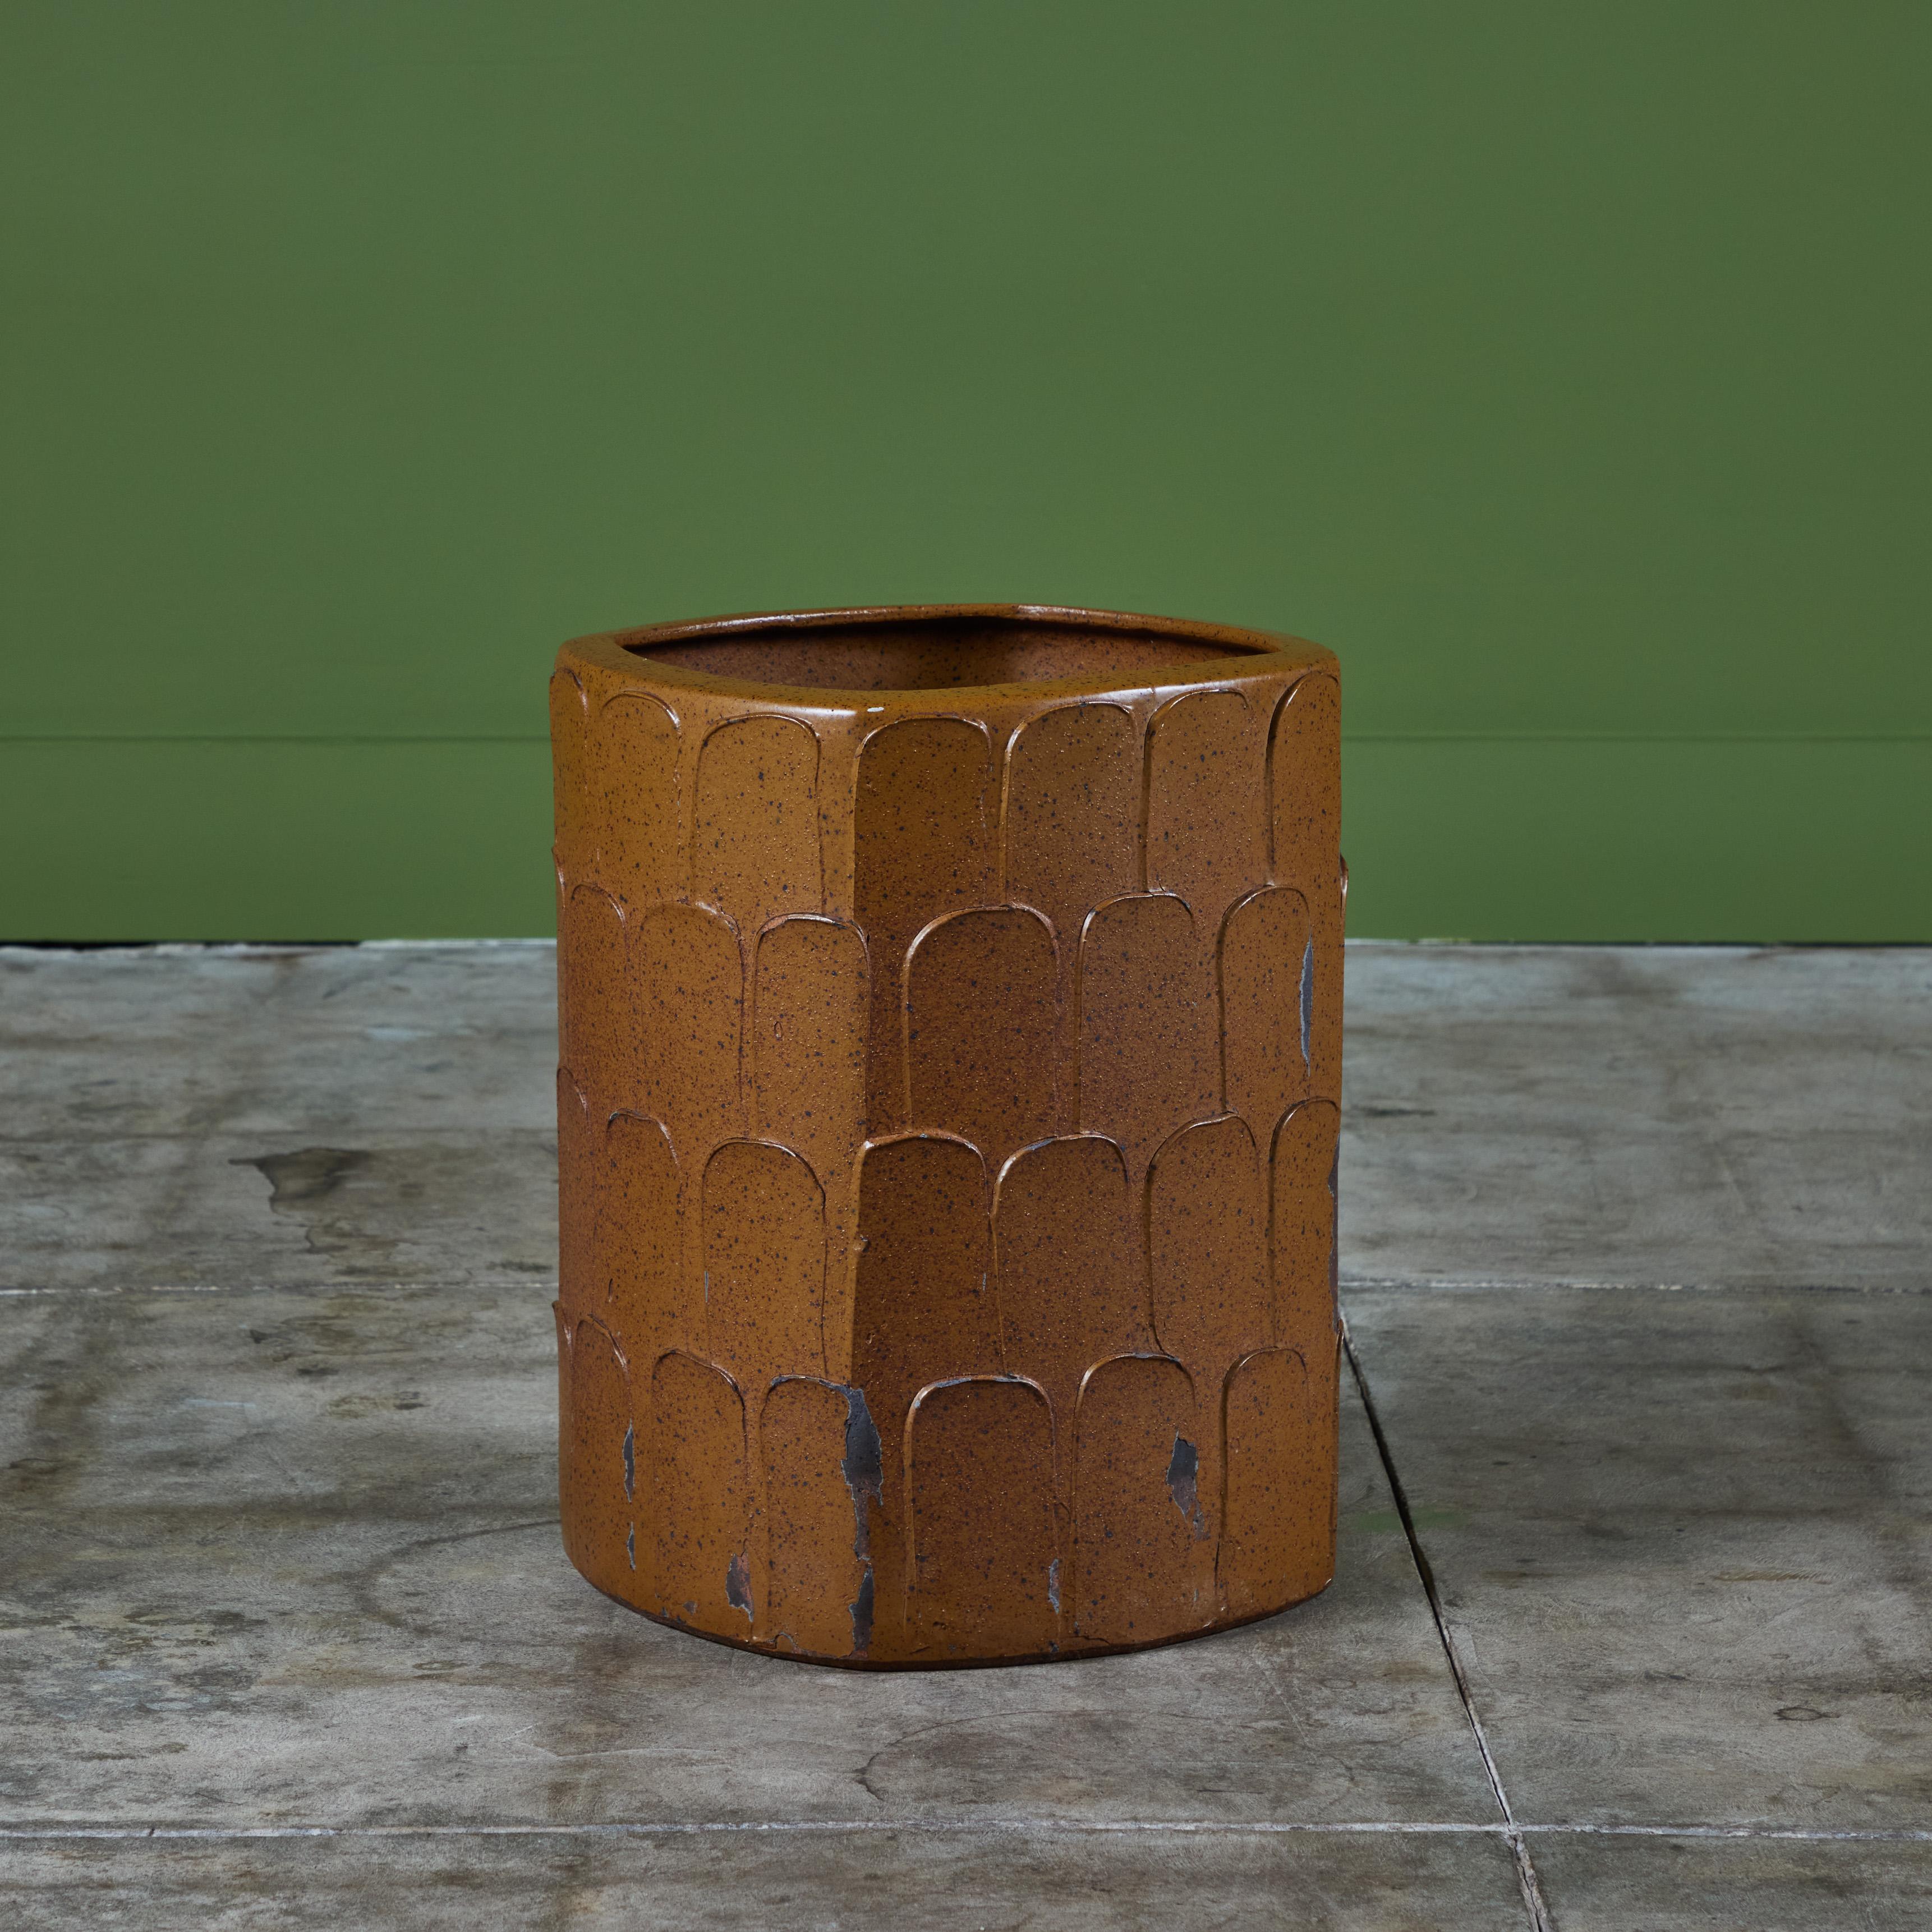 Glazed planter by ceramics artist Marilyn Kay Austin for Architectural Pottery with glazing and leaf pattern by David Cressey. This example, features a rounded square shape and all over leaf pattern. The speckled golden glaze can be found both